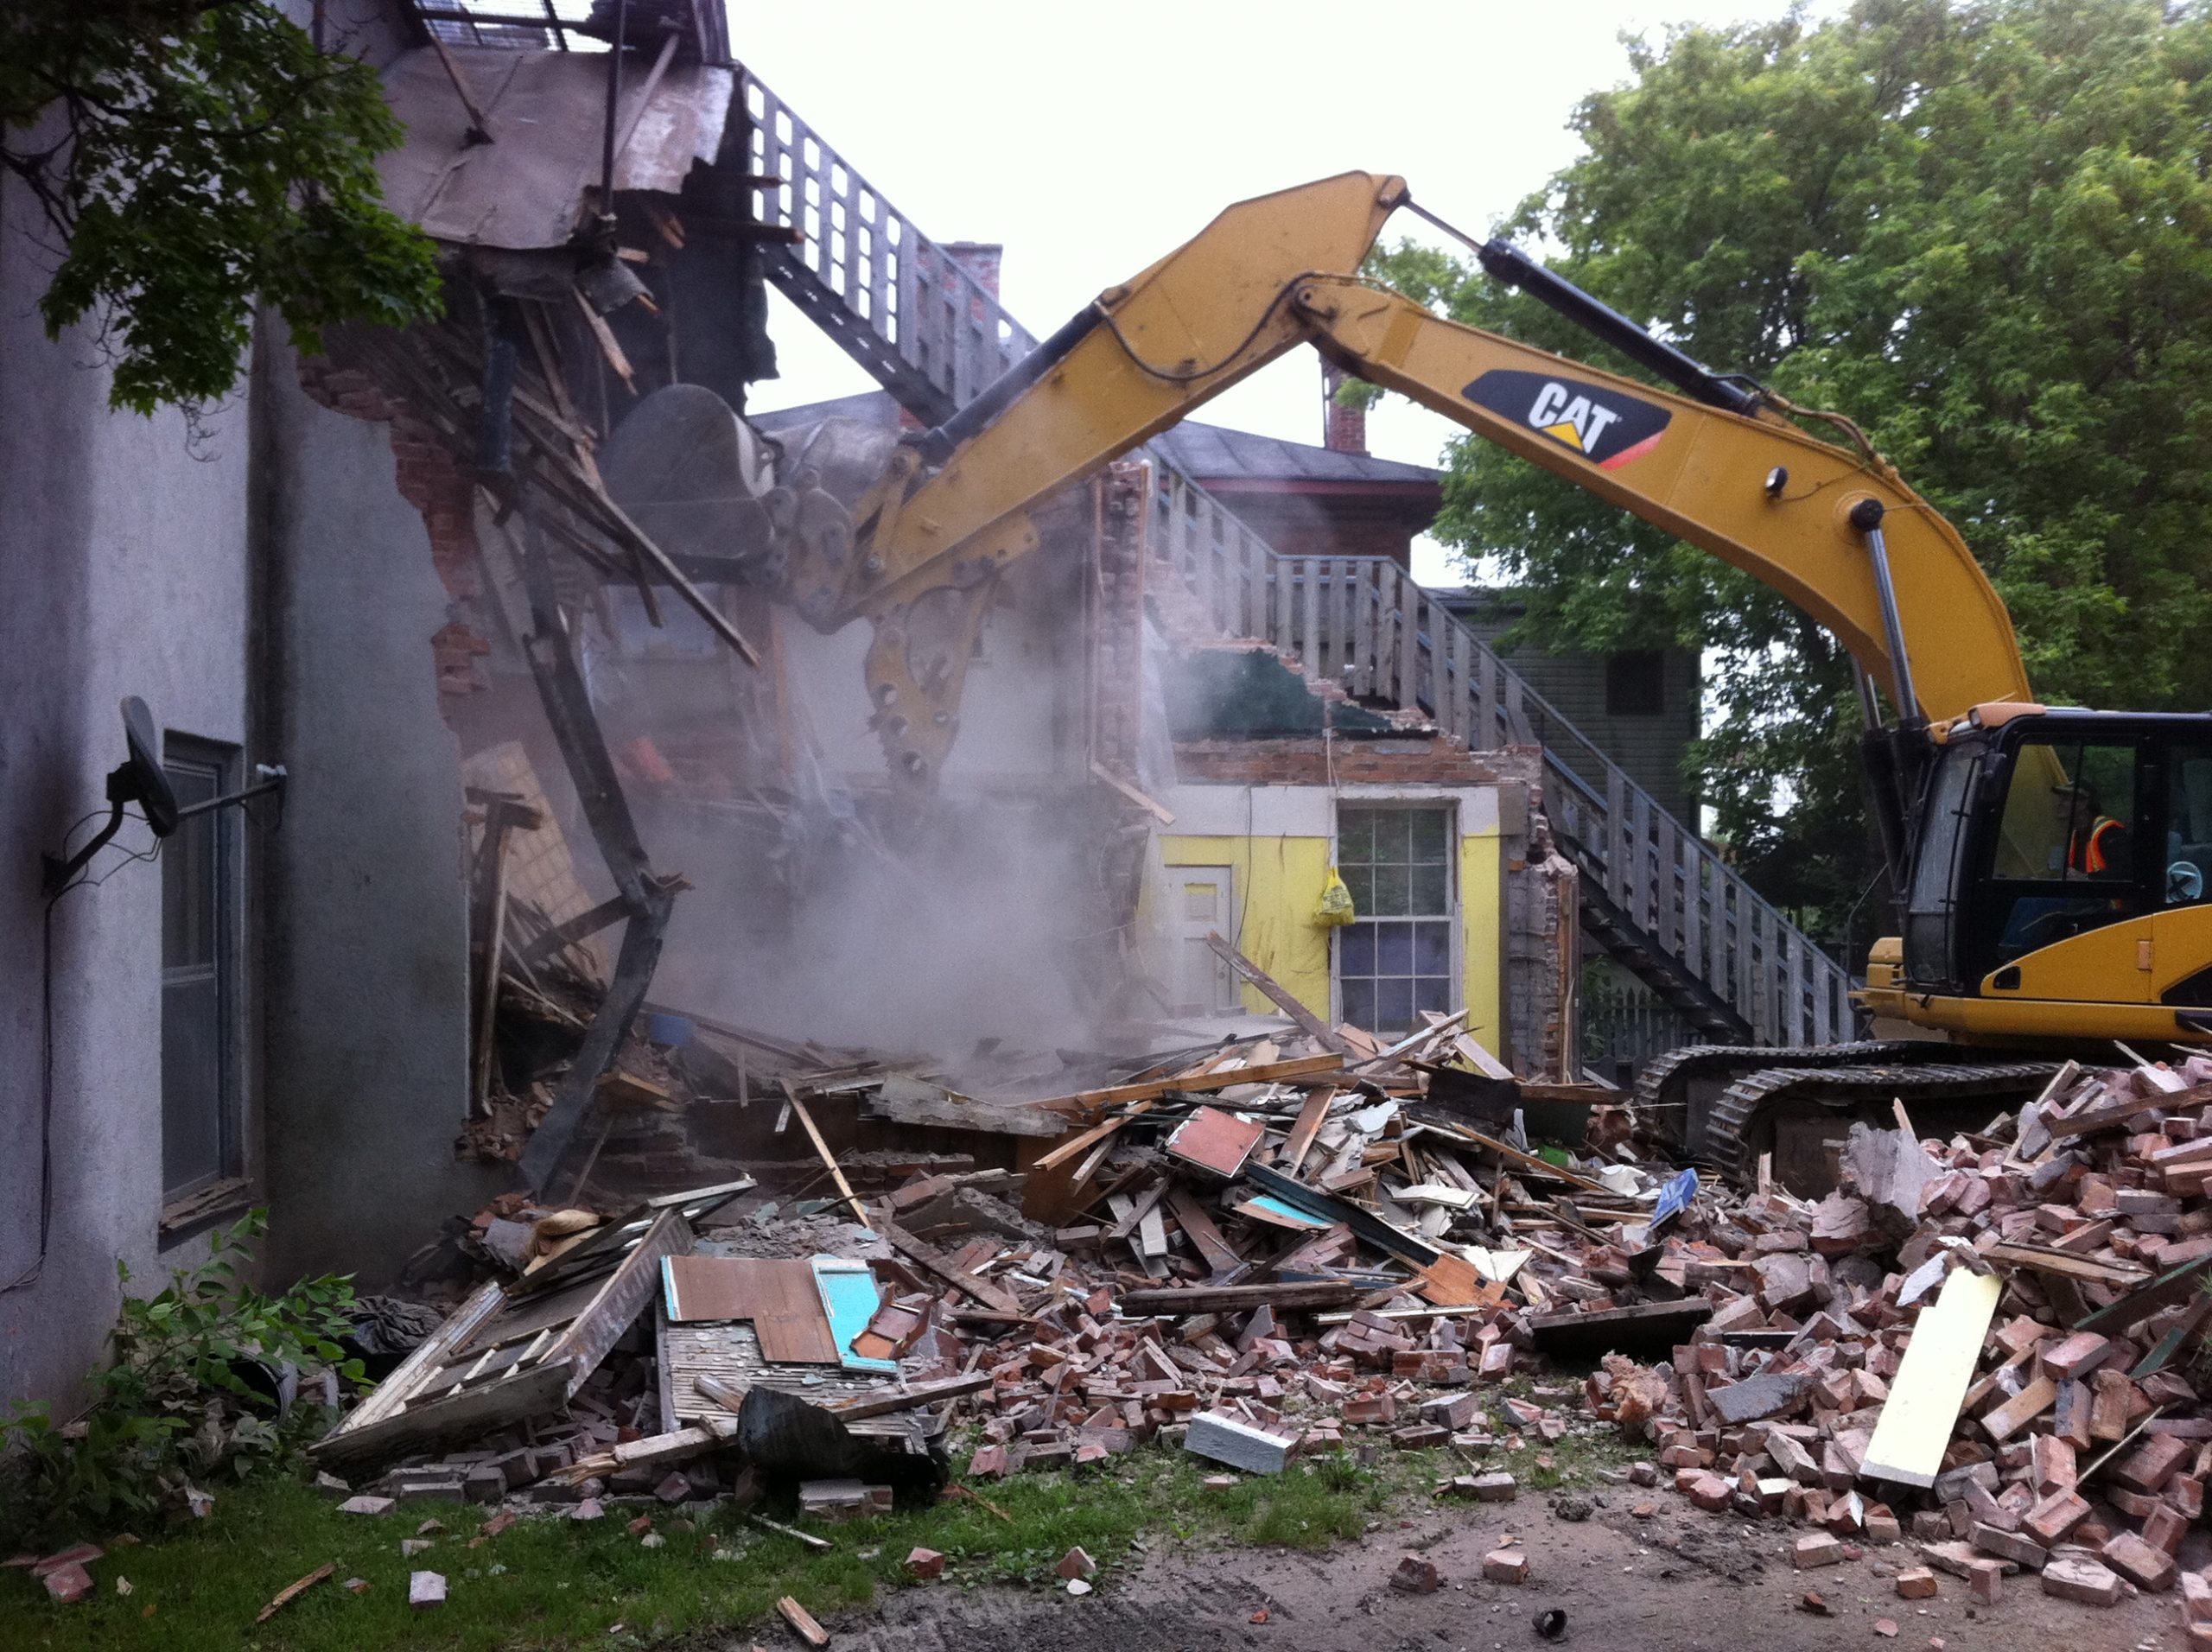 Excavation and Demolition Services in Kingston, Ontario